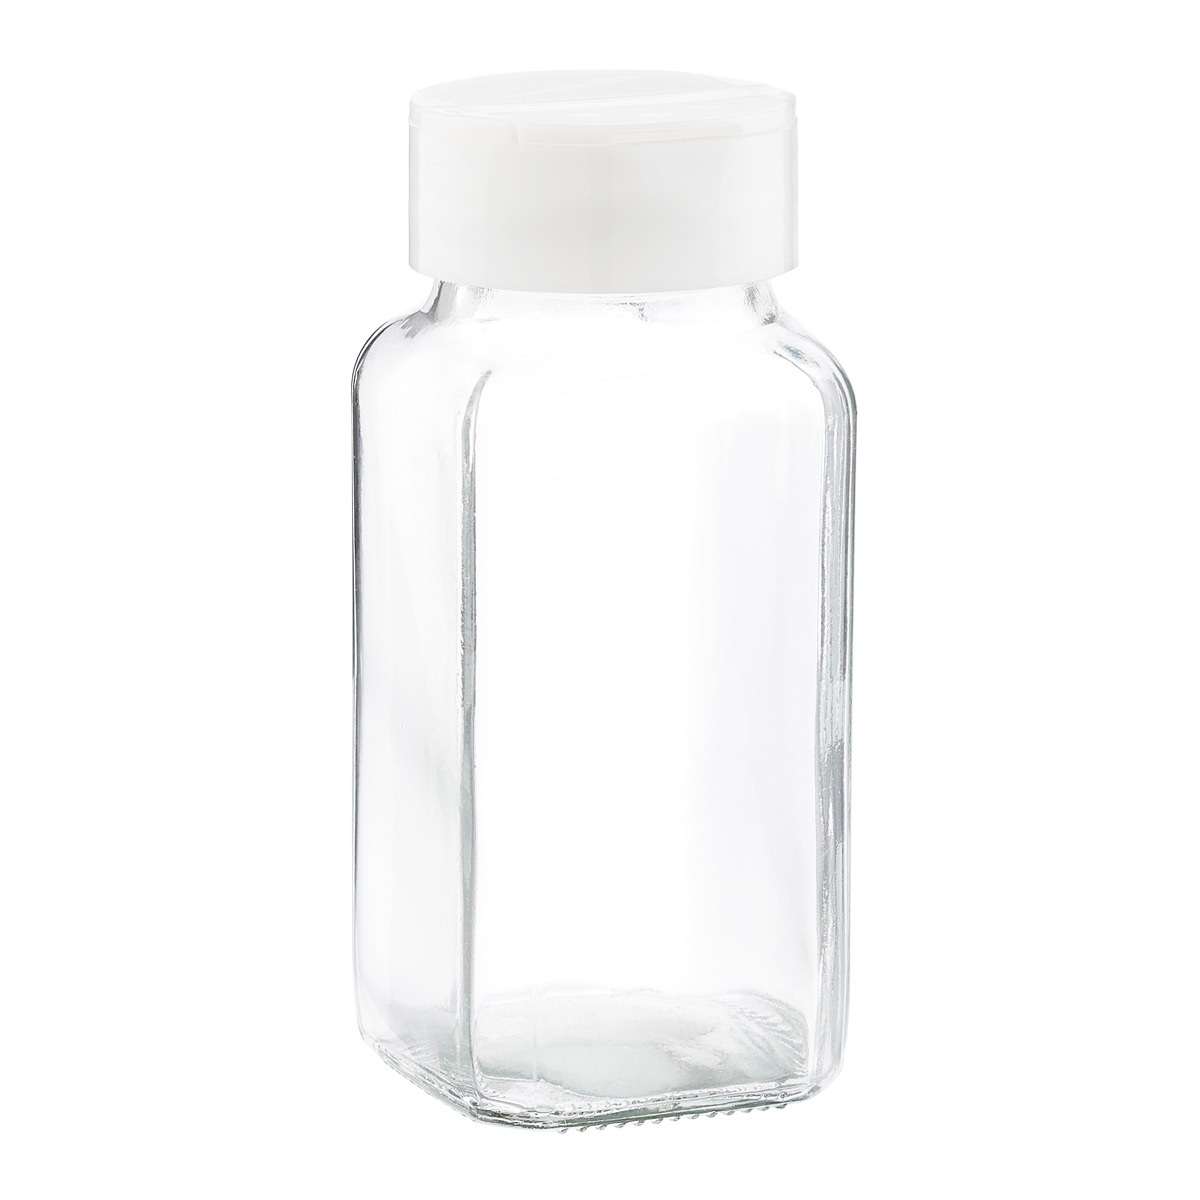 The Container Store 6 oz. Glass Shaker w/ Butterfly Lid White, 2 x 2 x 4-1/2 H